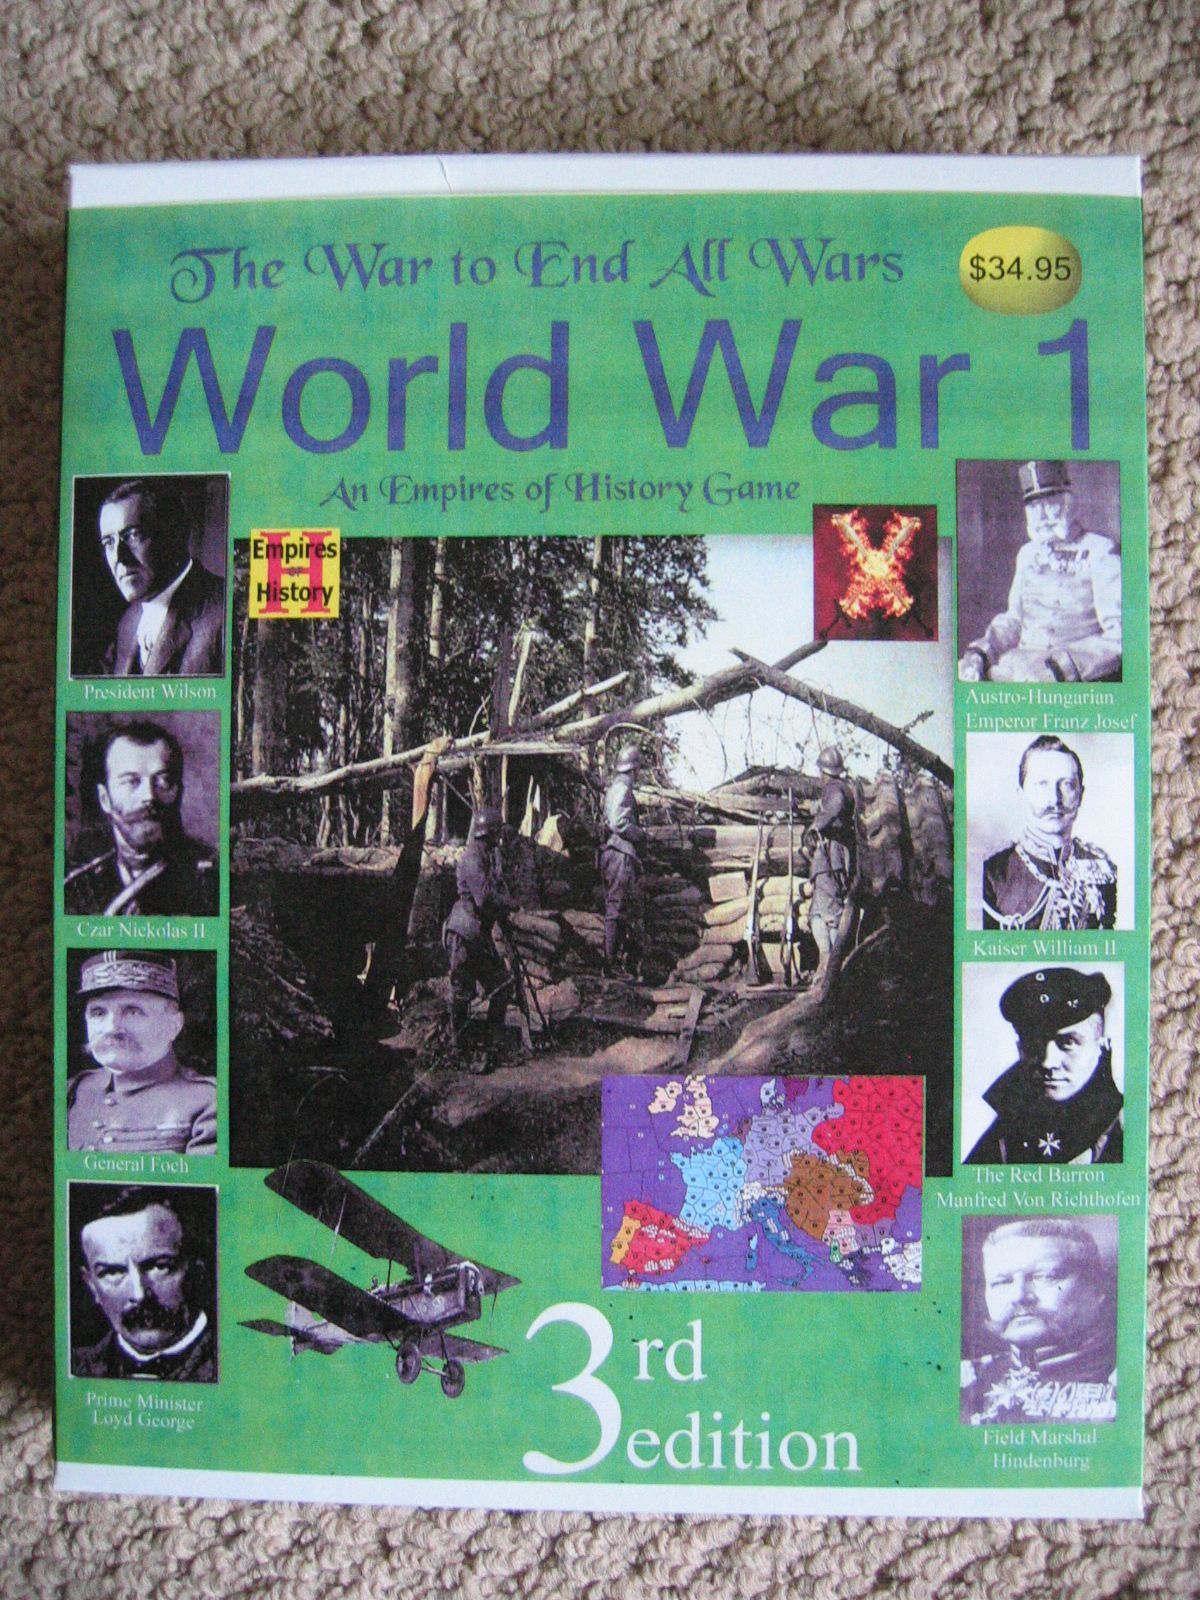 The War to End All Wars: Box Set Edition